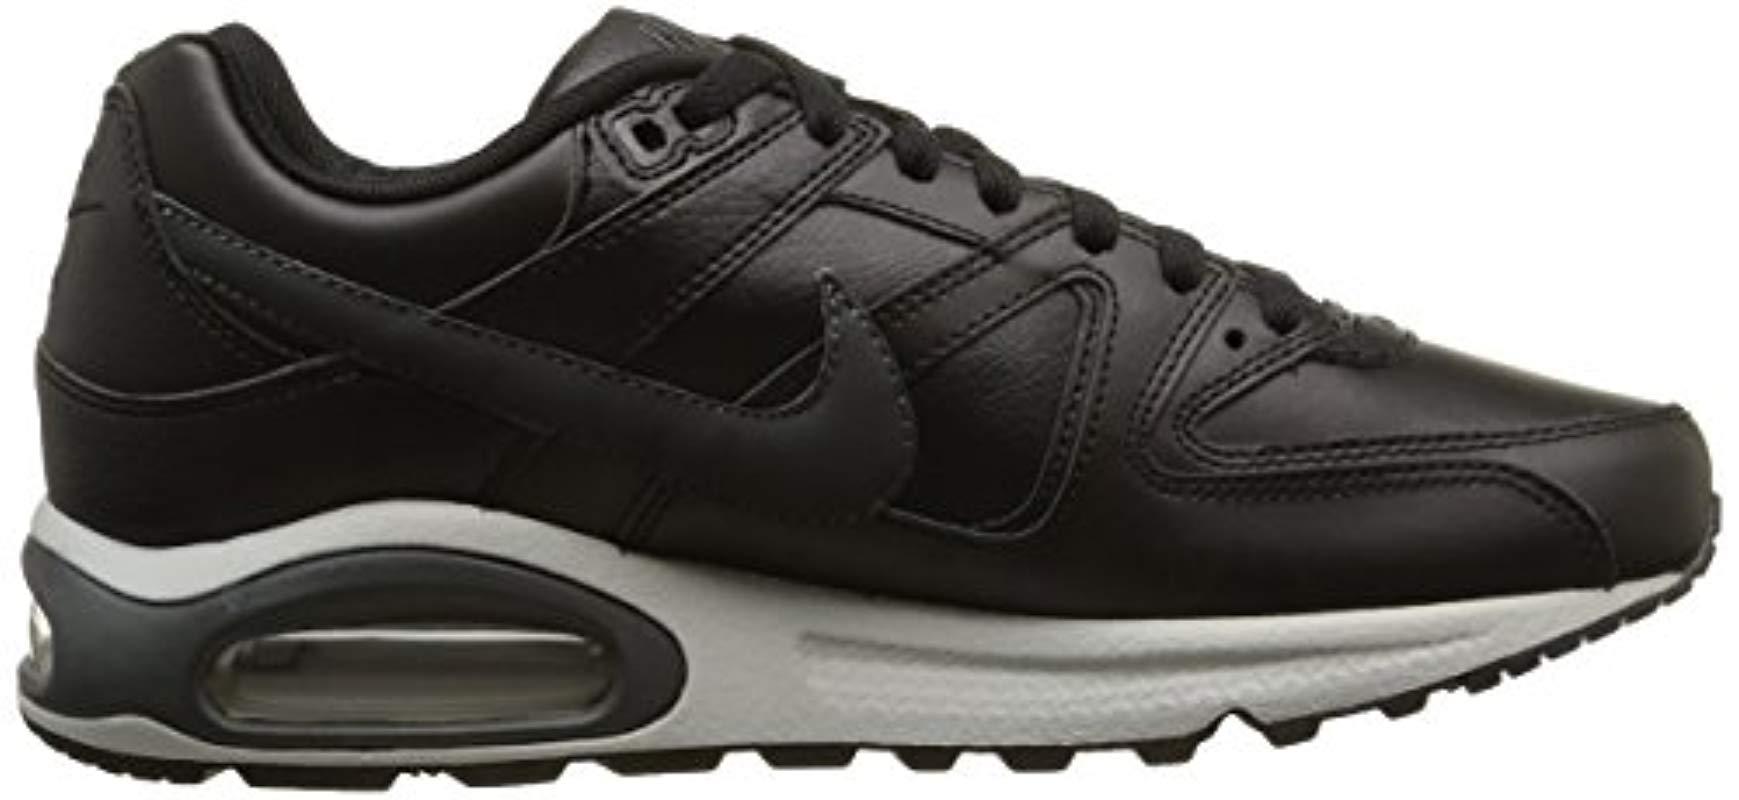 air max command leather